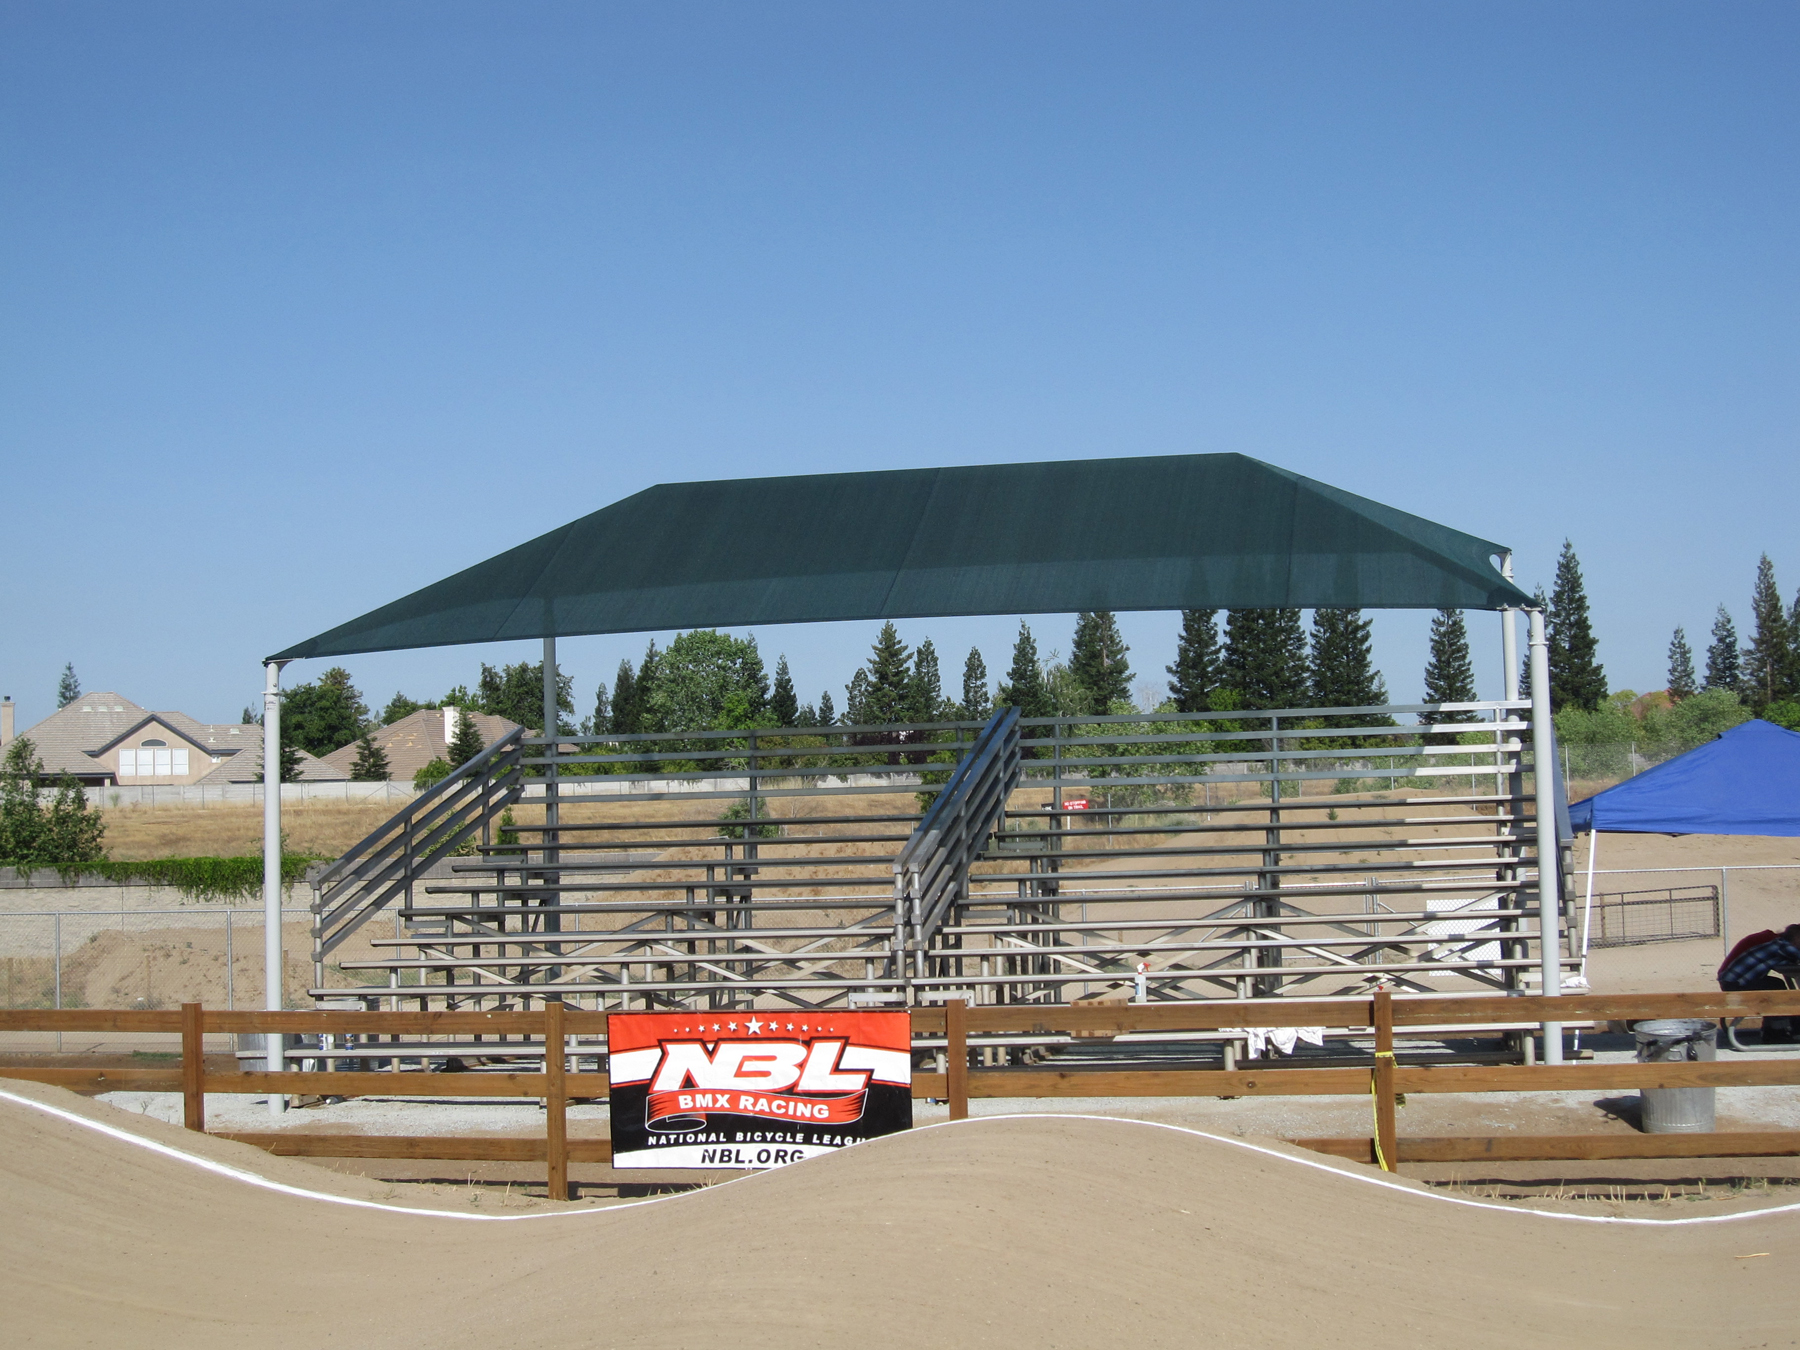 usa shade covering bleachers at bmx track